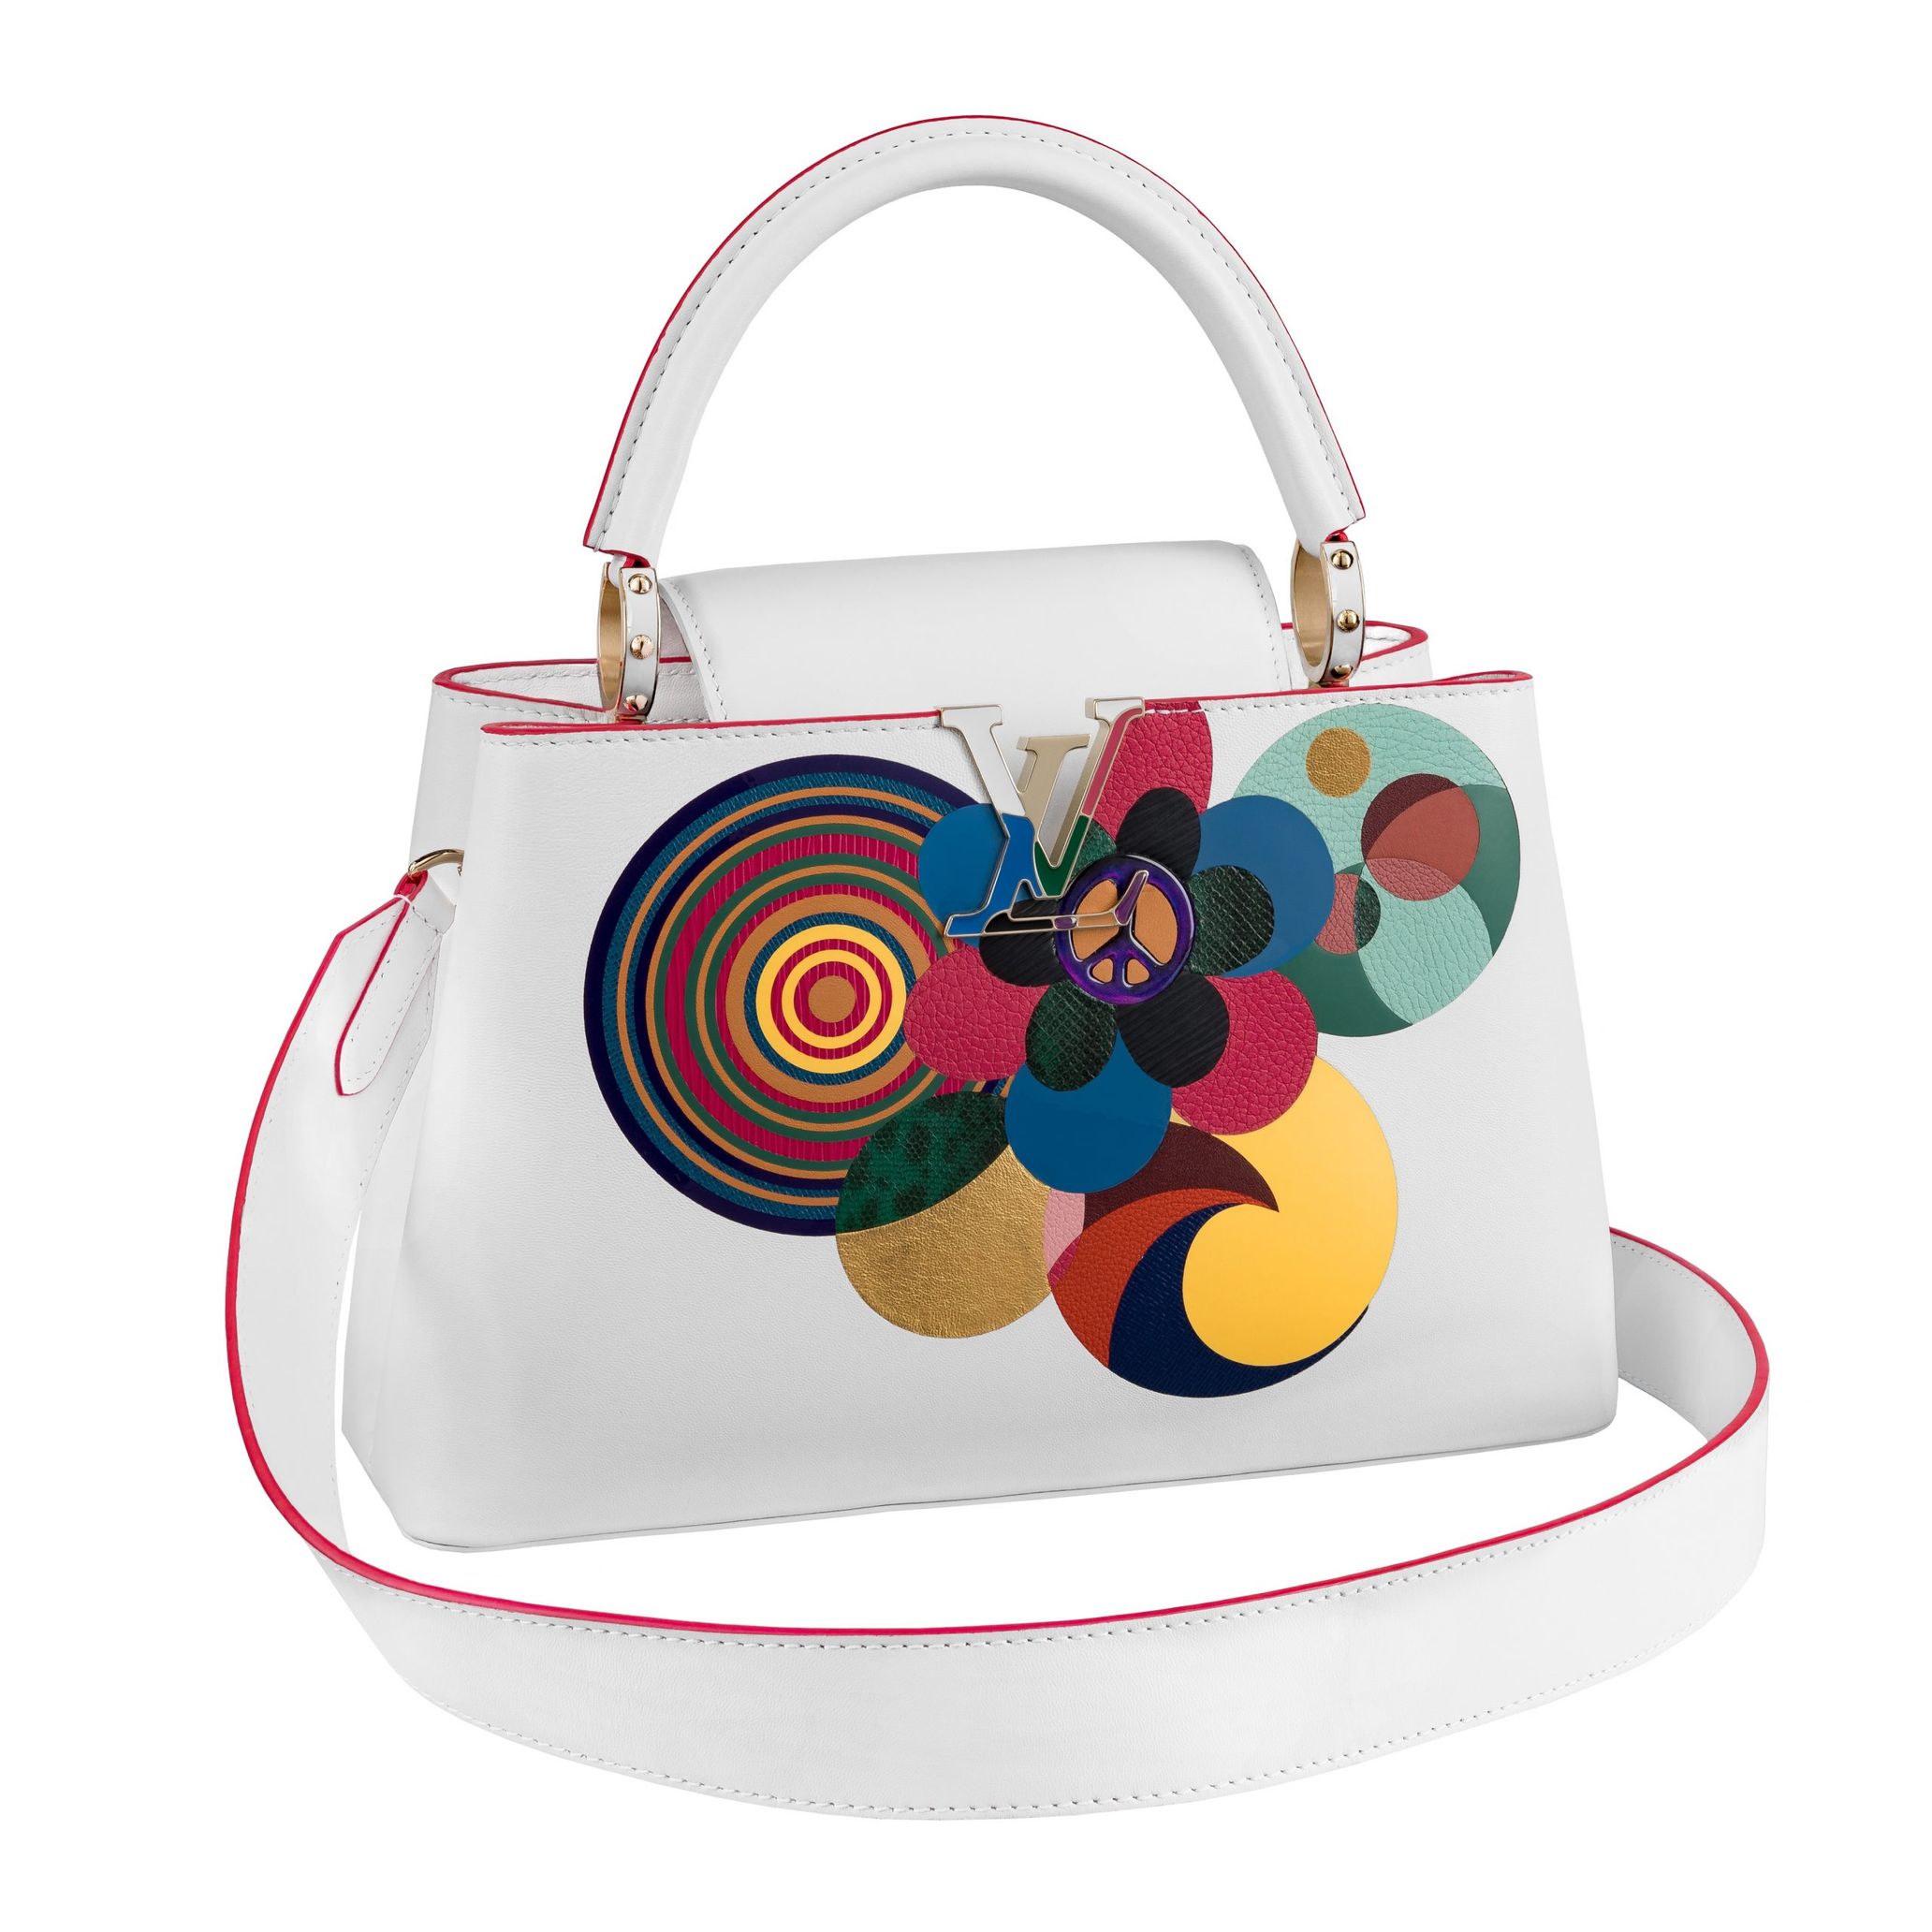 Louis Vuitton to newly launch its “Artycapucines Collection by